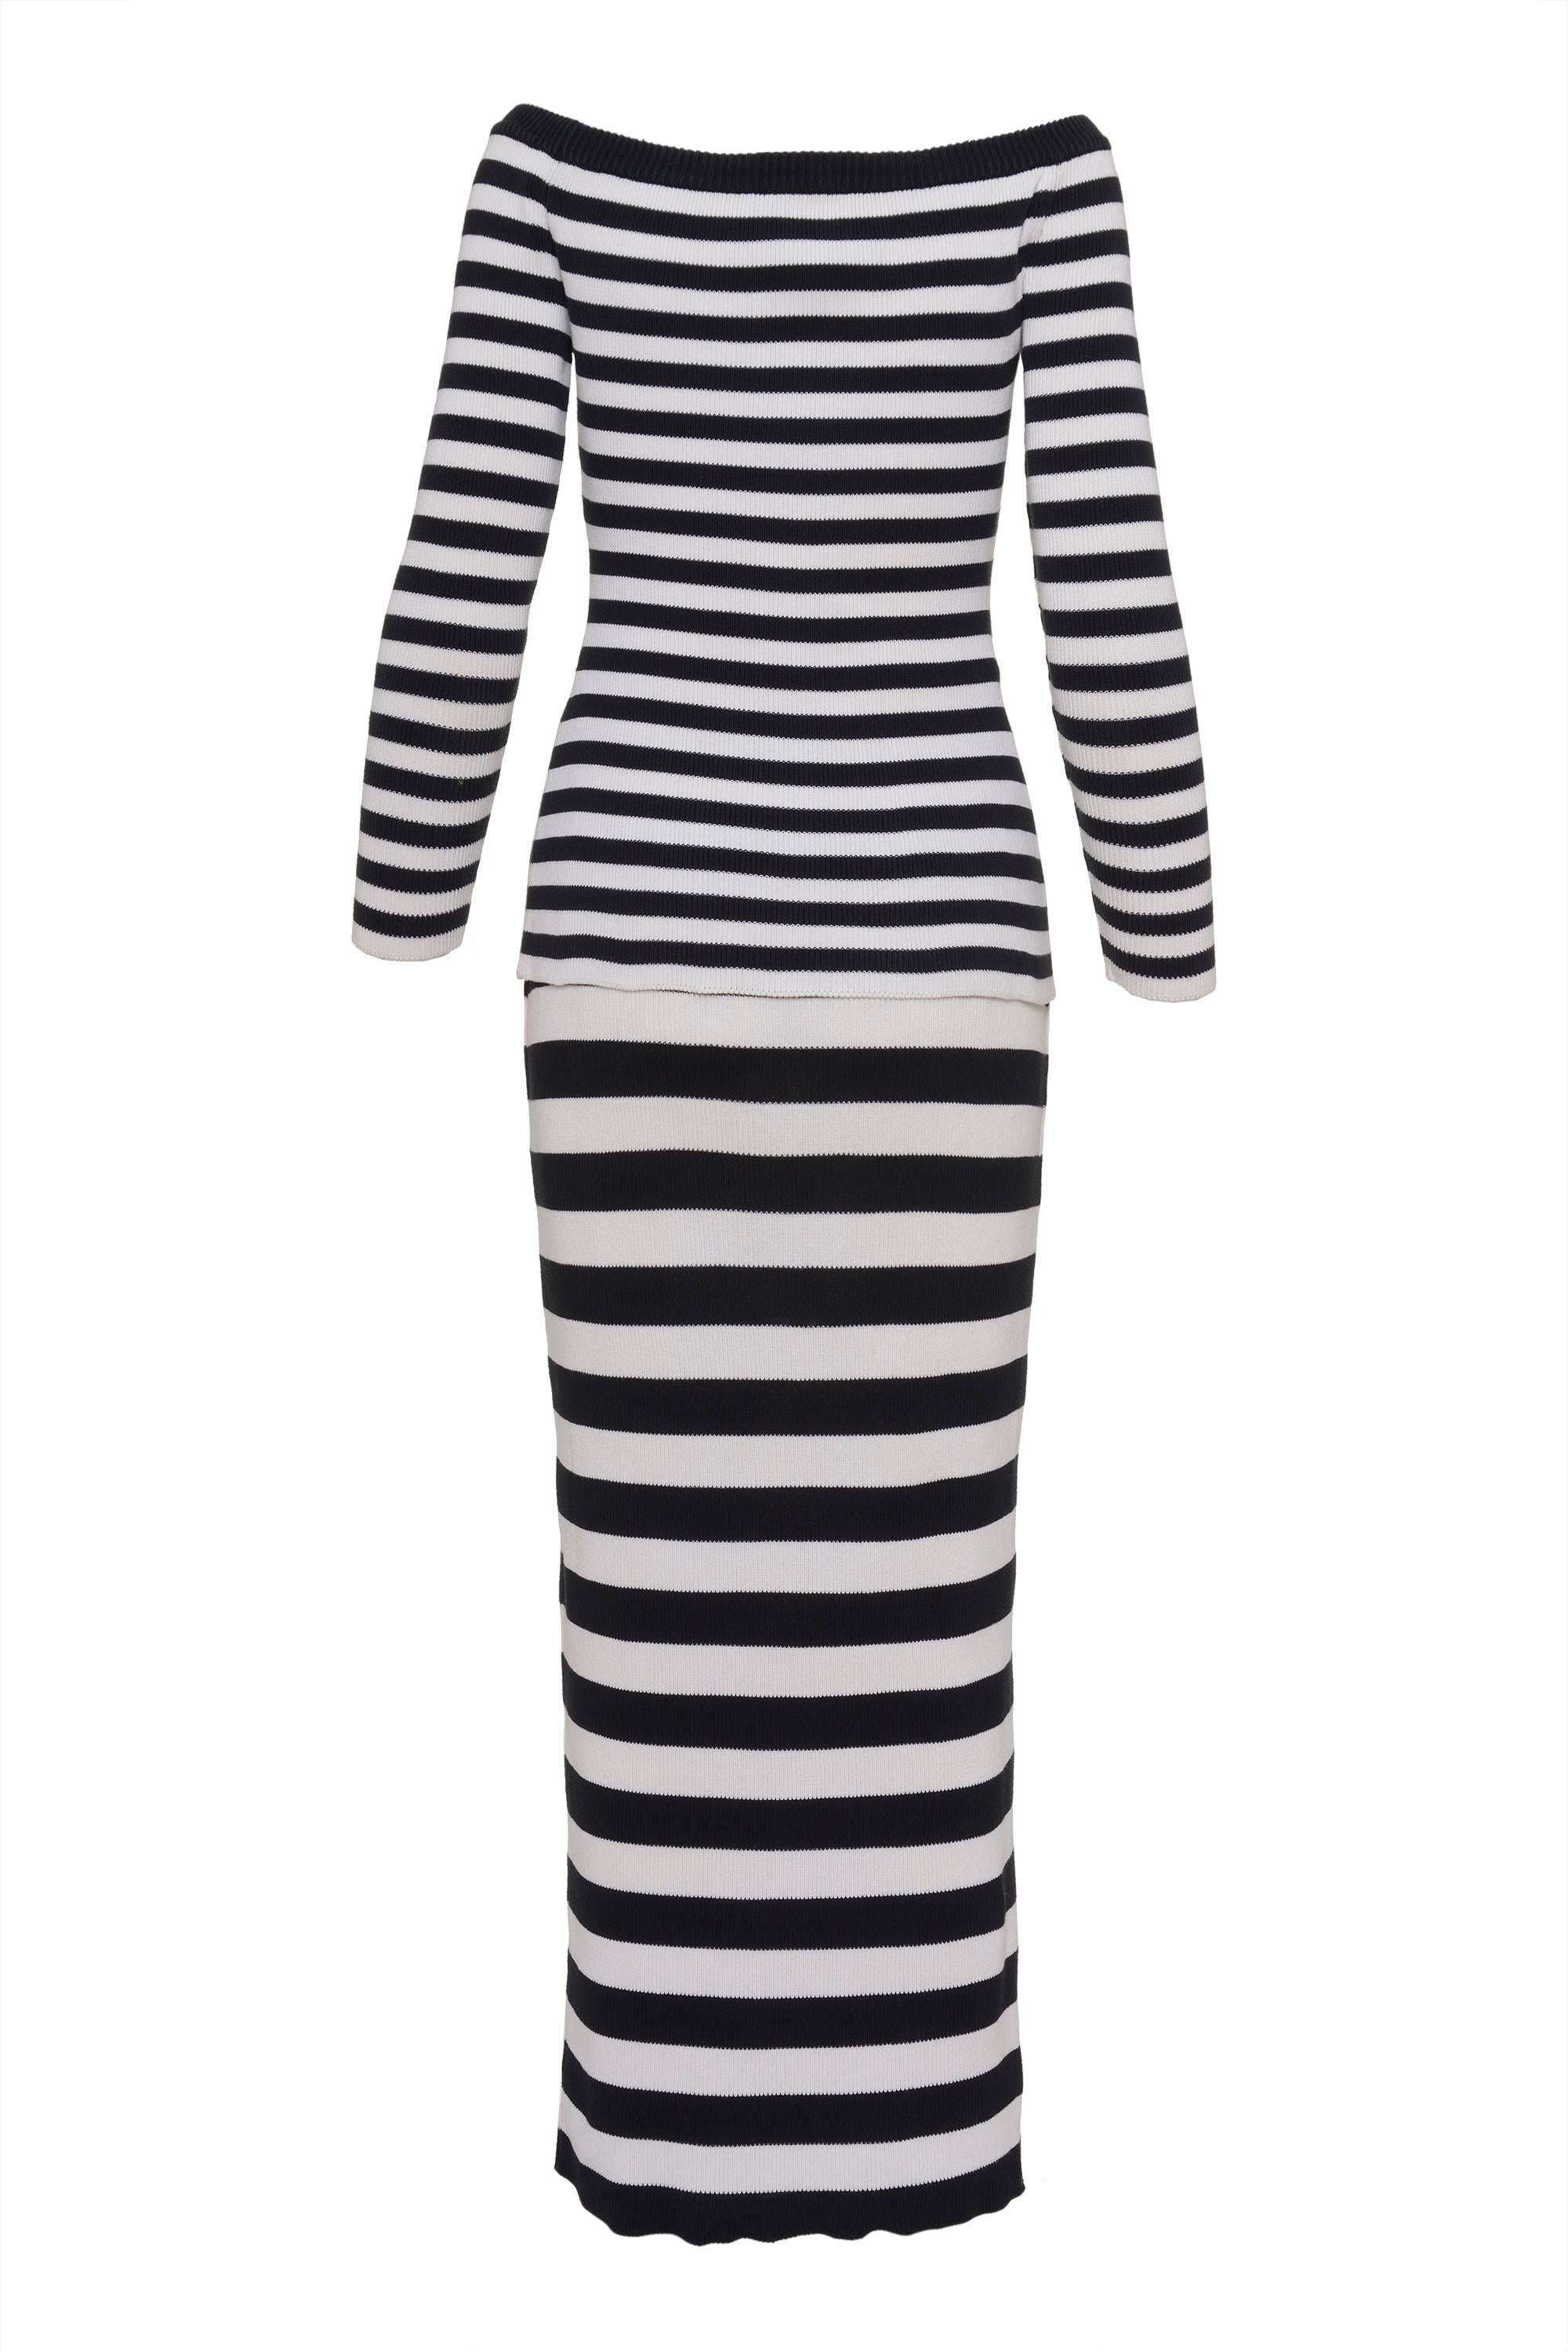 This striped black and white Sweater by SALVATORE FERRAGAMO has off-the-shoulder neckline and long sleeves, the skirt is long, and has stretched waist closure. both of the items have jersey knit textile. Made in Italy.

Lable: Salvatore